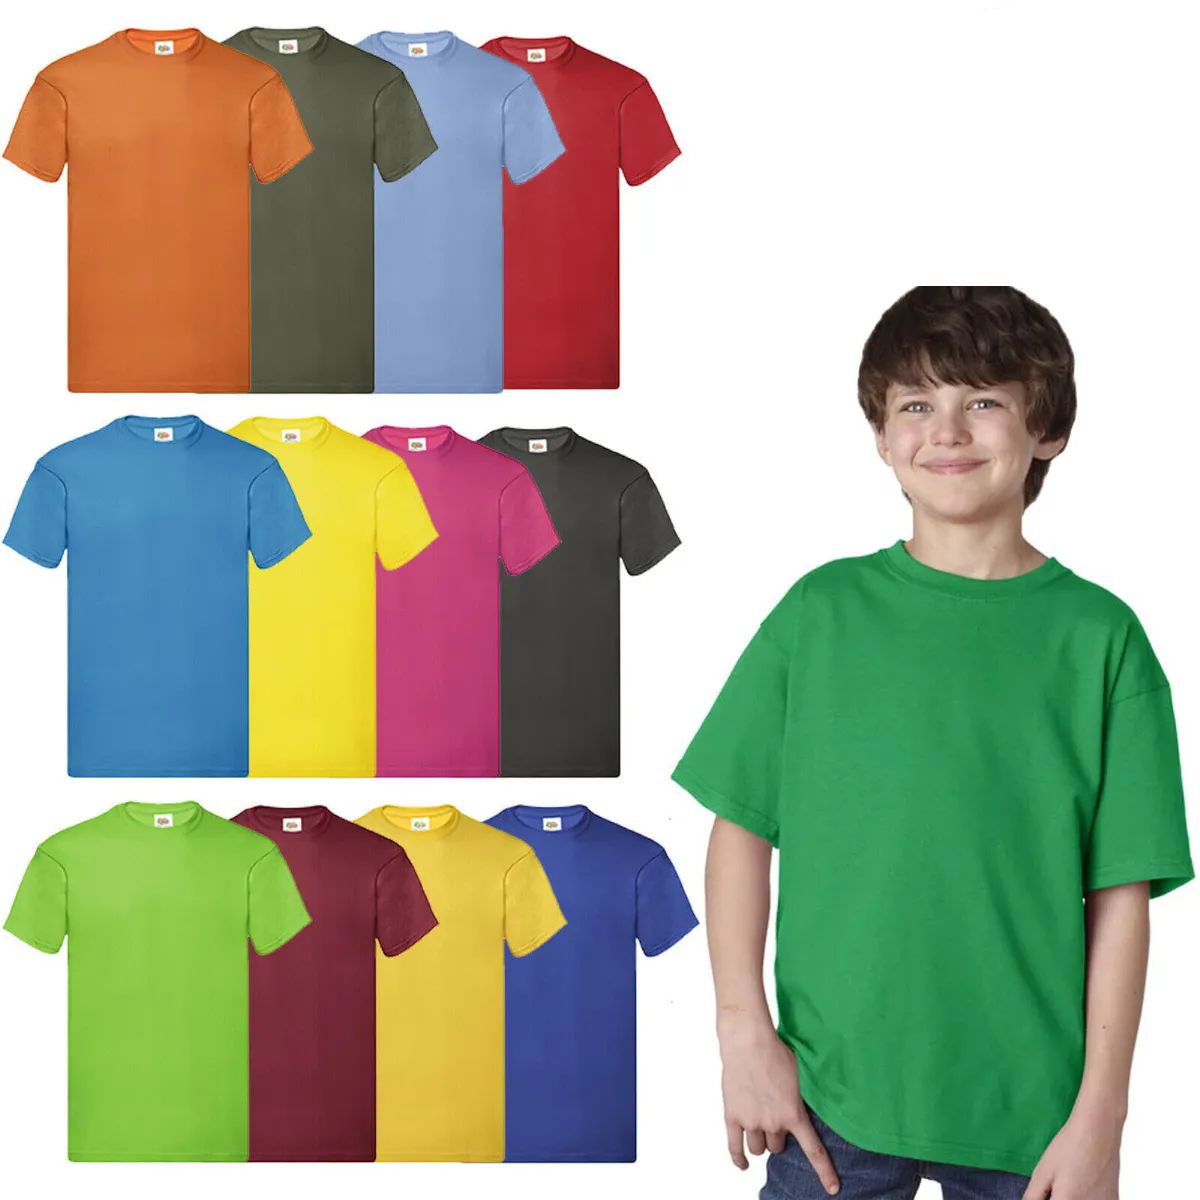 72 Pieces of Billionhats Kids Youth Cotton Assorted Colors T-Shirts Size Medium